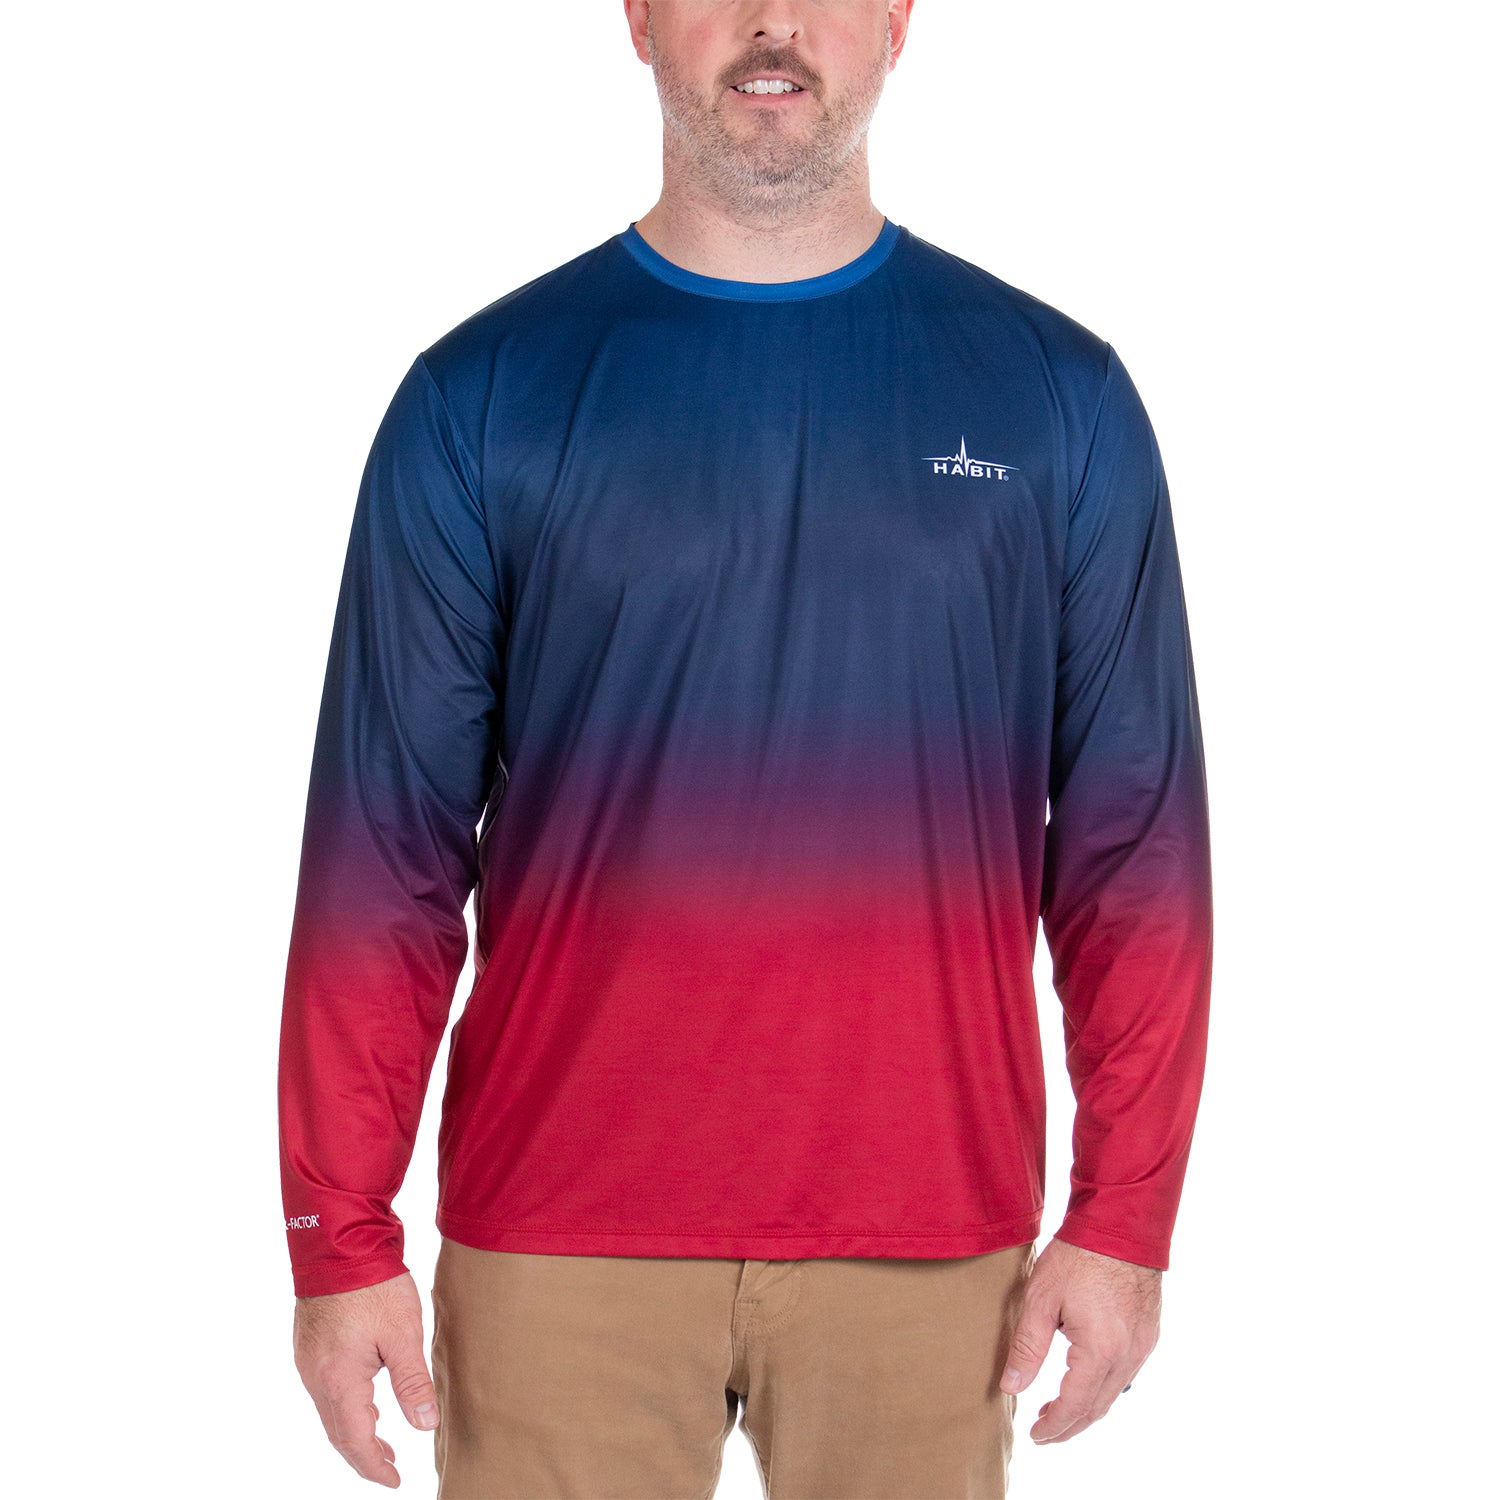 Habit Seagrass Cove Long Sleeve Quick Dry UPF 40+ Performance Tee (Red American, XL), Men's